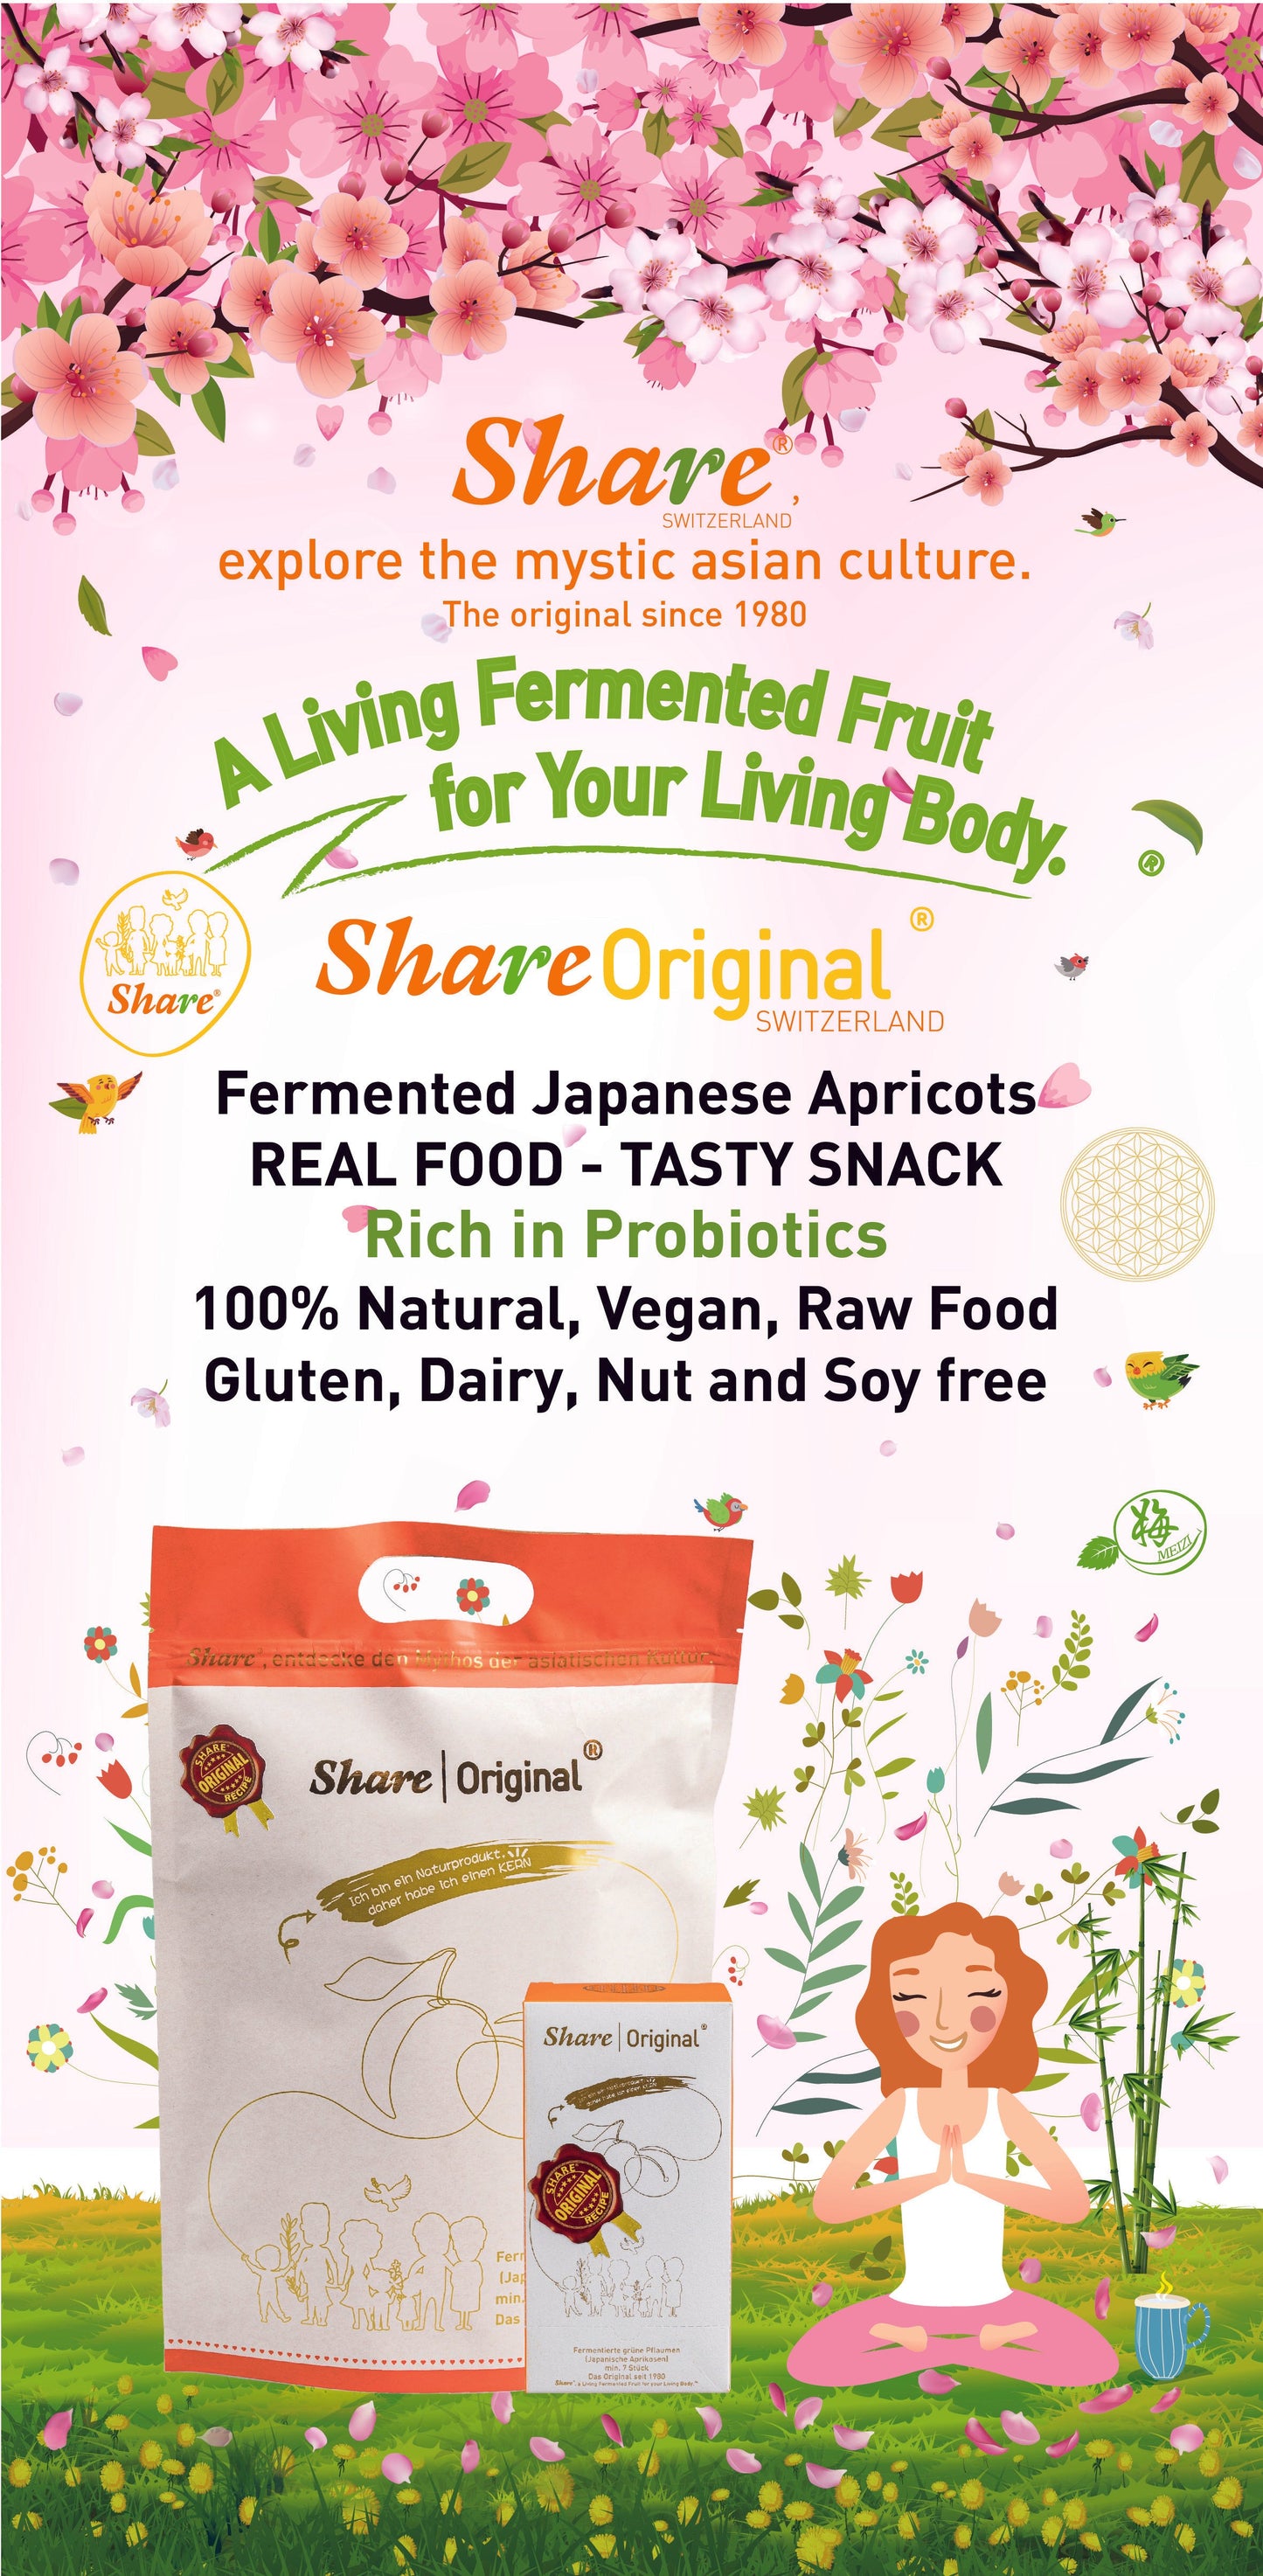 Share Original® Fermented Plum/Japanese Apricot (7-pc Organza Bag): 30+month naturally fermented, effective natural alternative to lab-made laxatives & probiotics, vegan & non-GMO, individually wrapped packet easy for travel (Swiss-made, free shipping)